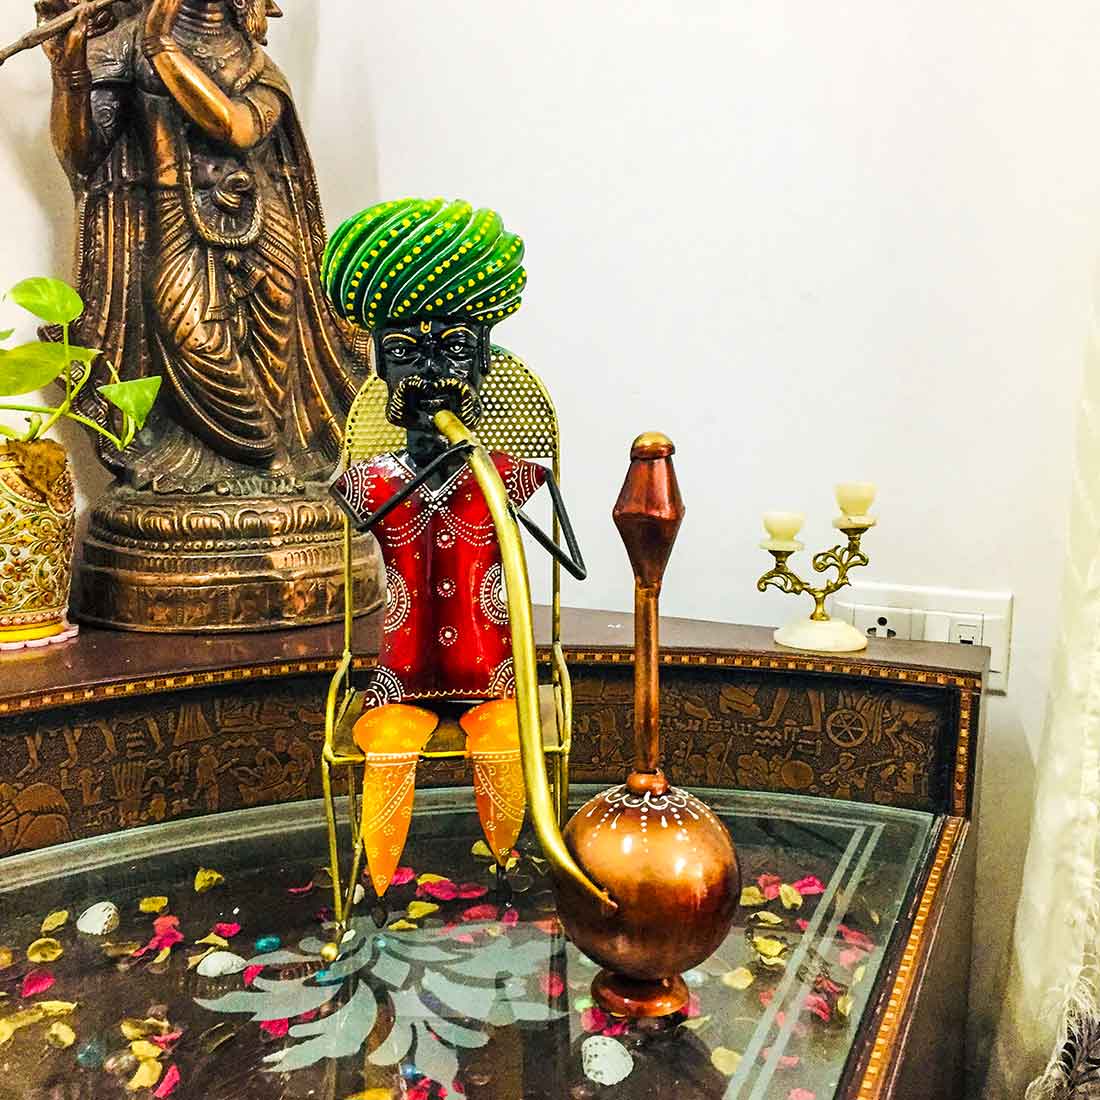 Man with Hukka - Antique Showpiece - For Table Decor & Gifts -17 Inch - ApkaMart